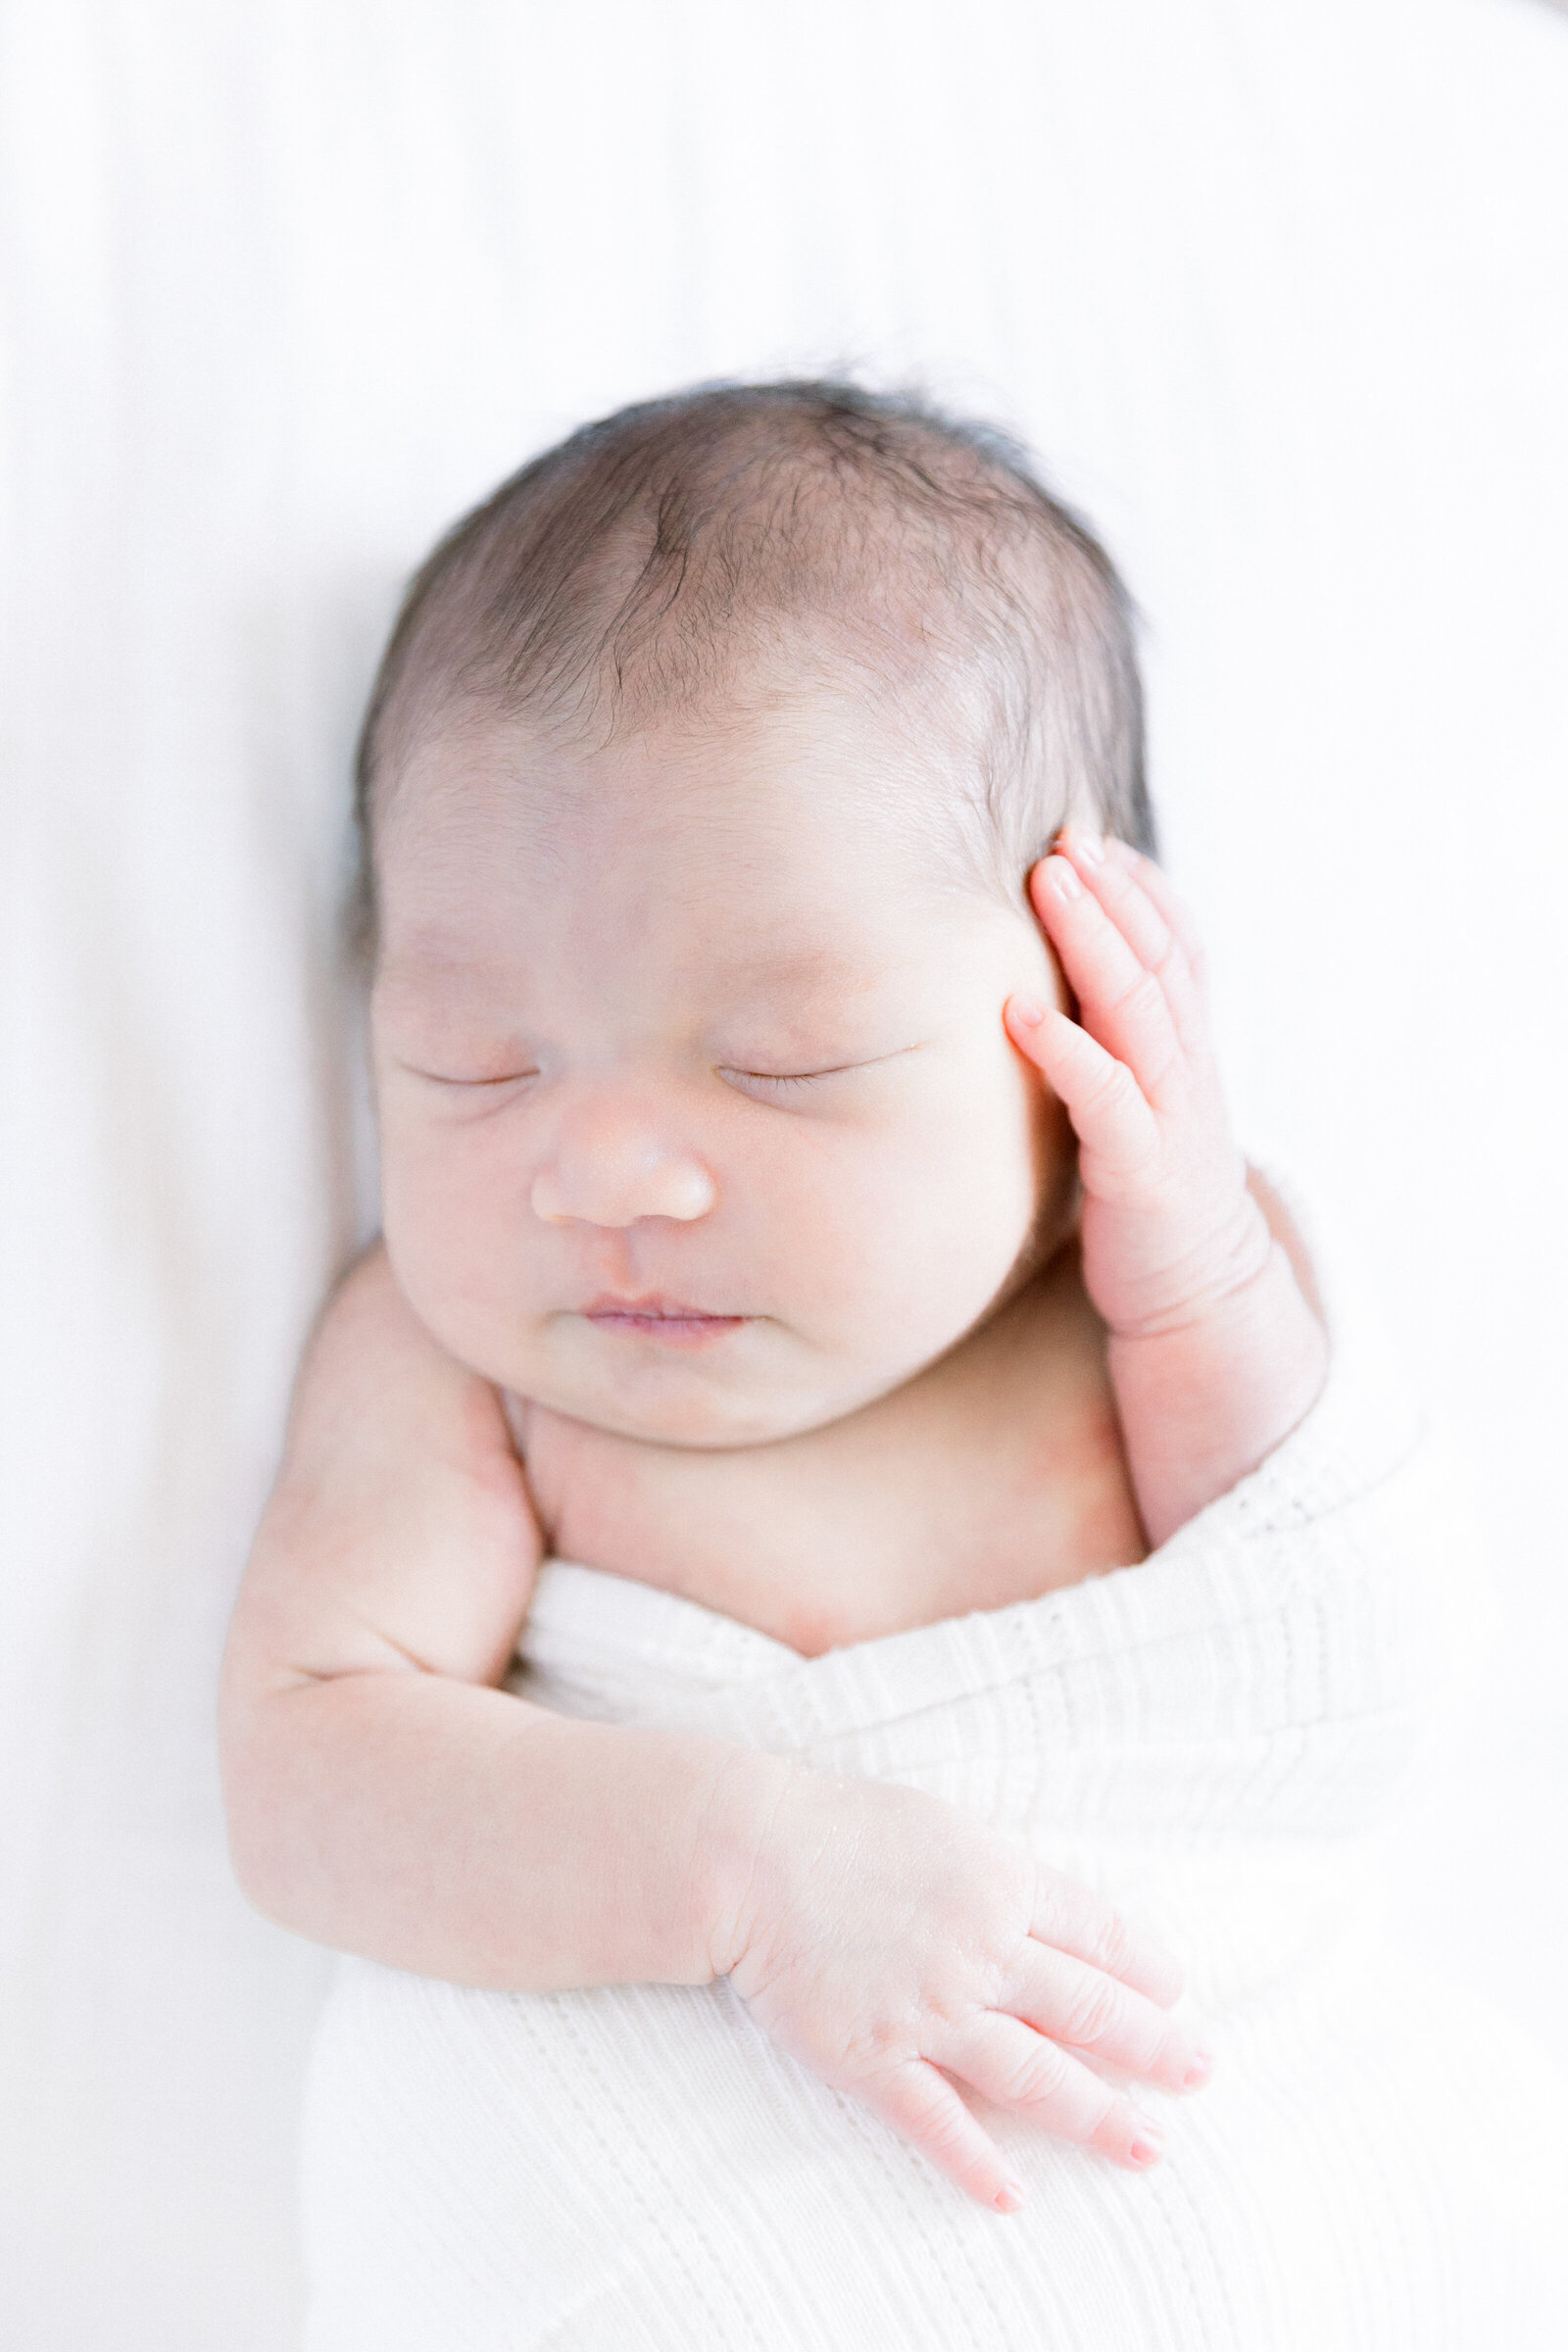 Image of sleeping baby with hand on face taken by Sacramento Newborn Photographer Kelsey krall